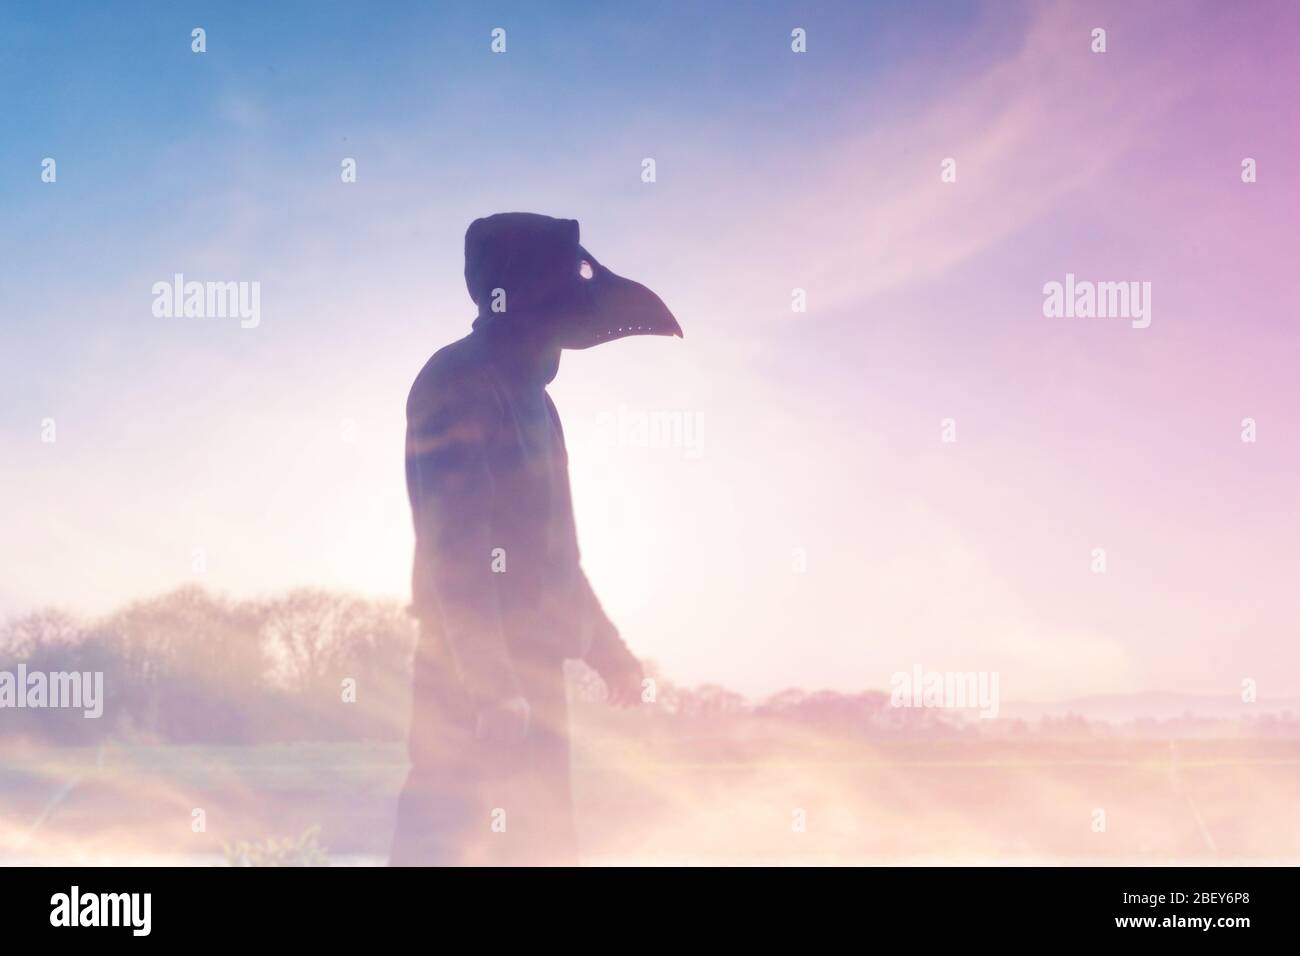 A double exposure of a moody, hooded figure with a plague doctor mask, silhouetted against the sunset. With an abstract, experimental dream like edit. Stock Photo